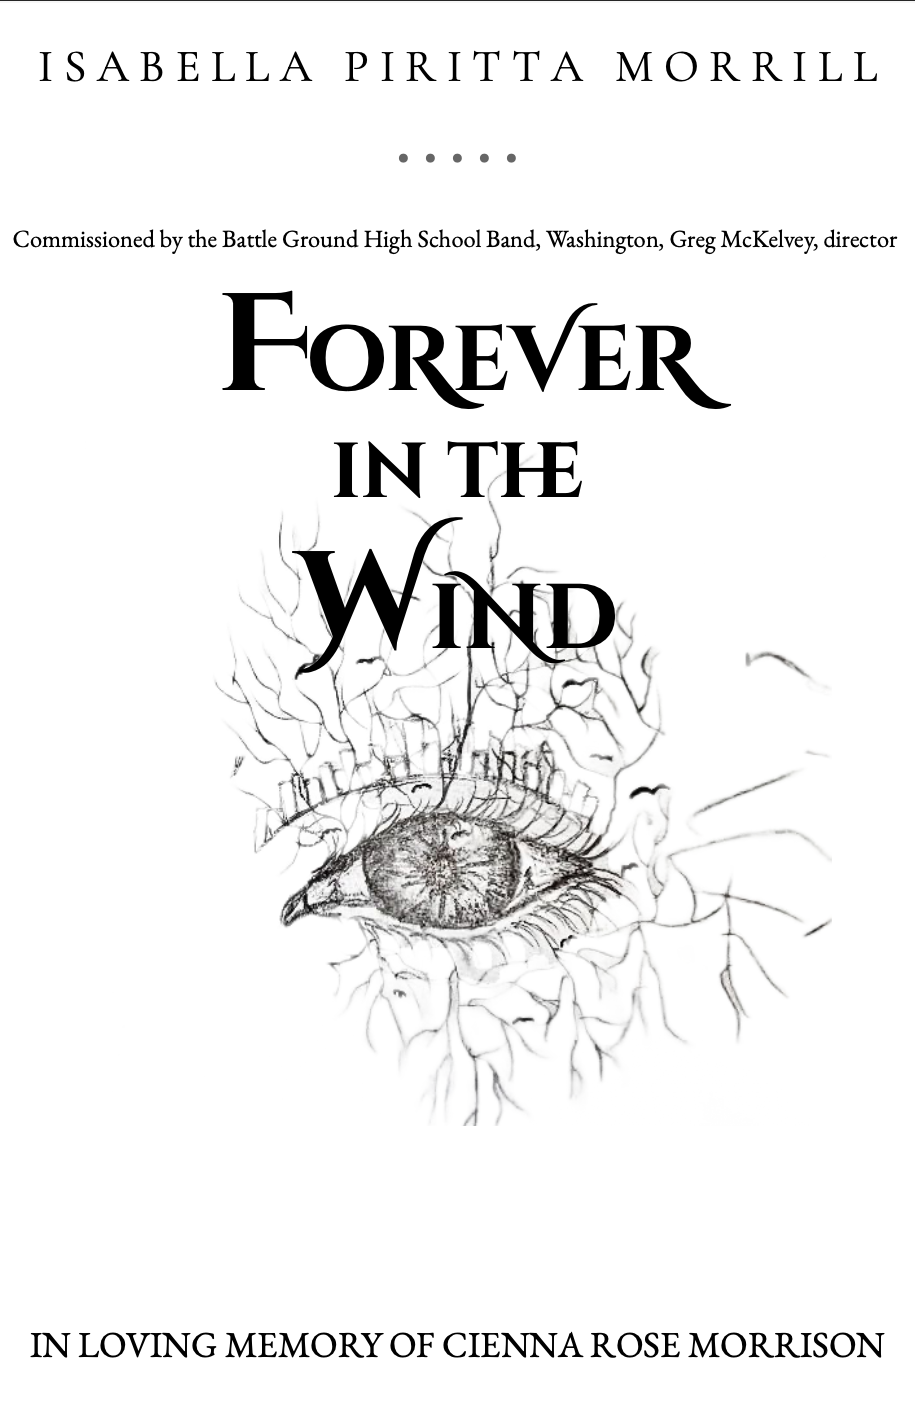 Forever In The Wind by Isabella Piritta Morrill